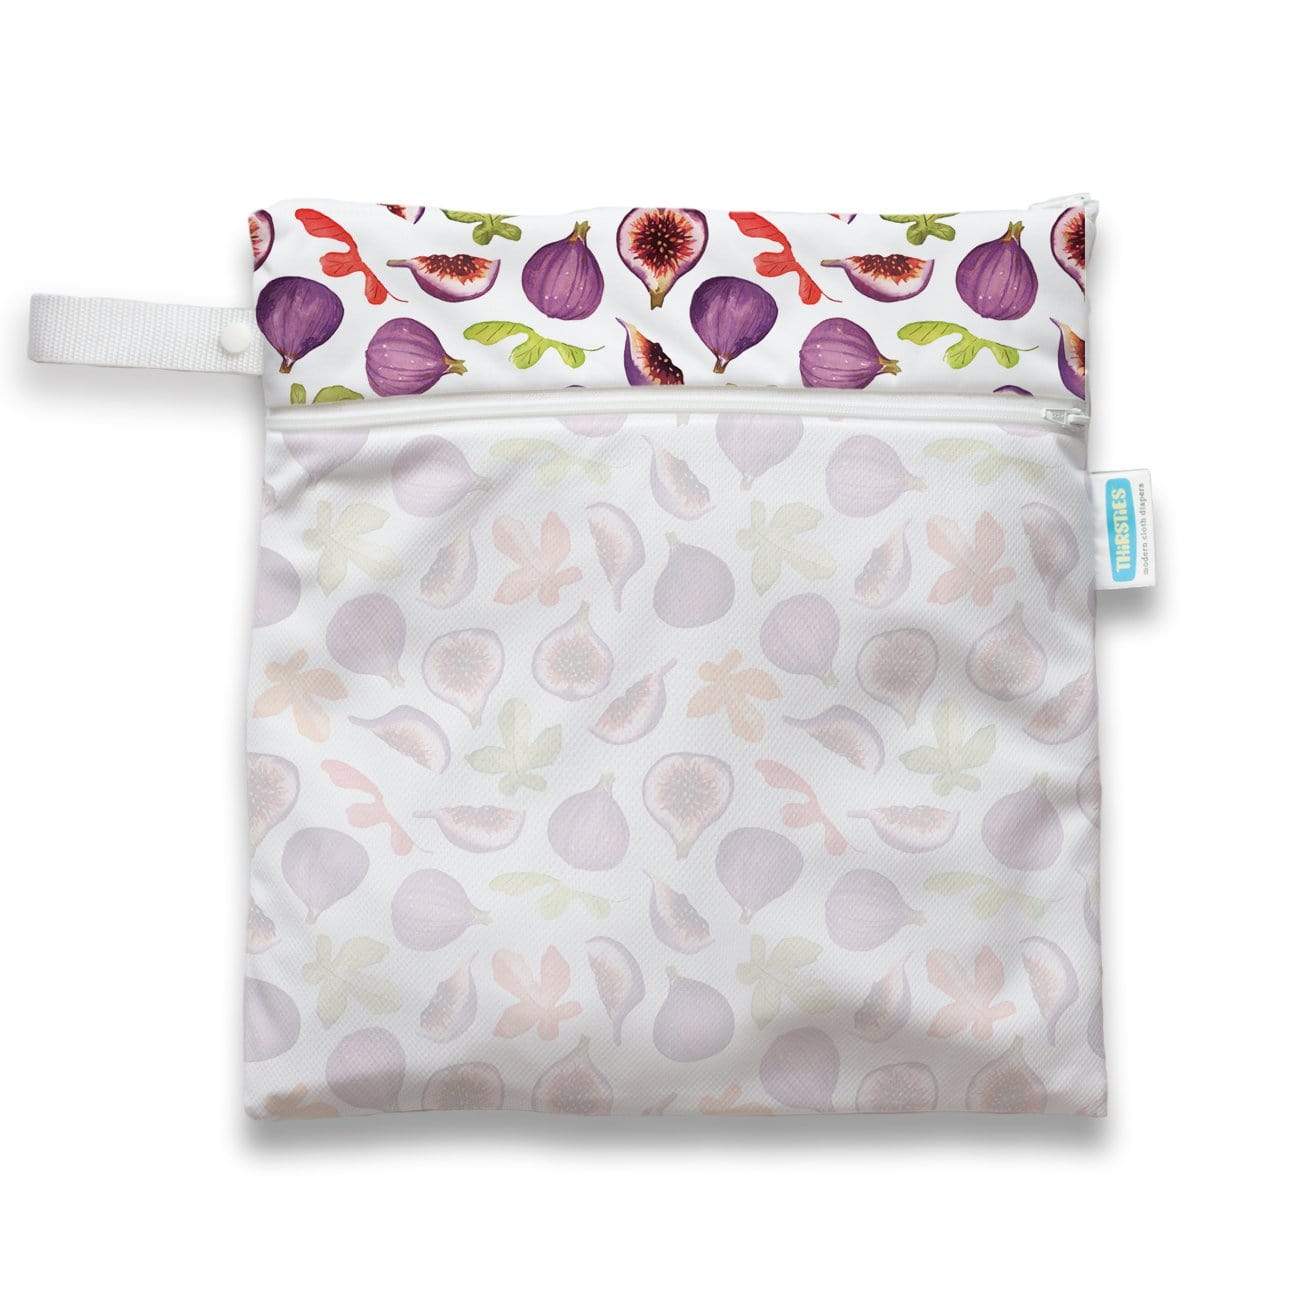 Mother-ease Cloth Diapers and Accessories - Leak-free since 1991!